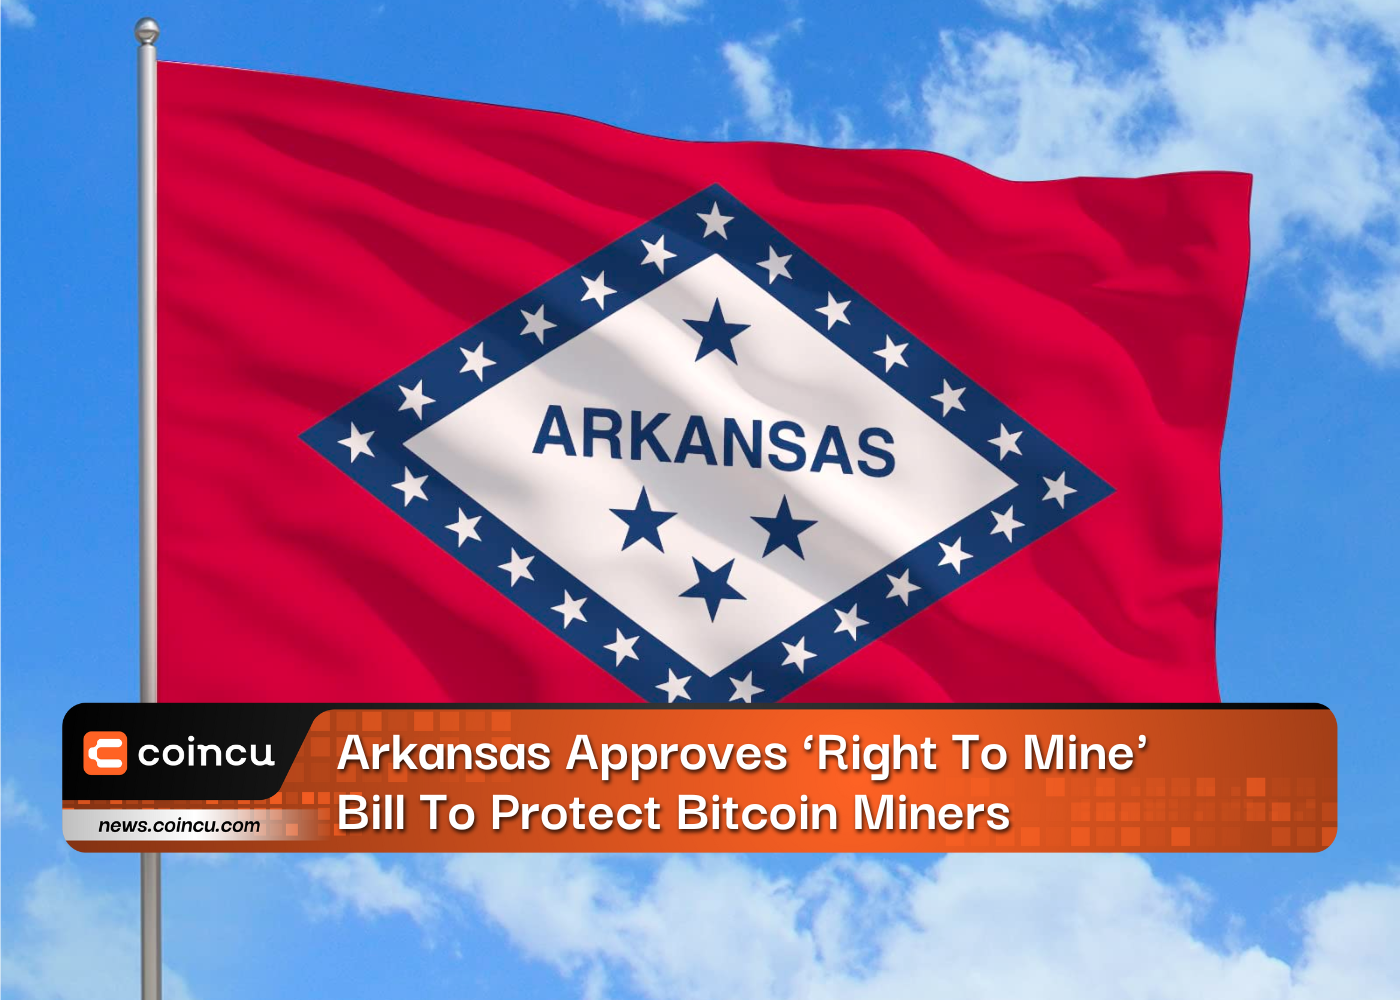 Arkansas Approves ‘Right To Mine' Bill To Protect Bitcoin Miners